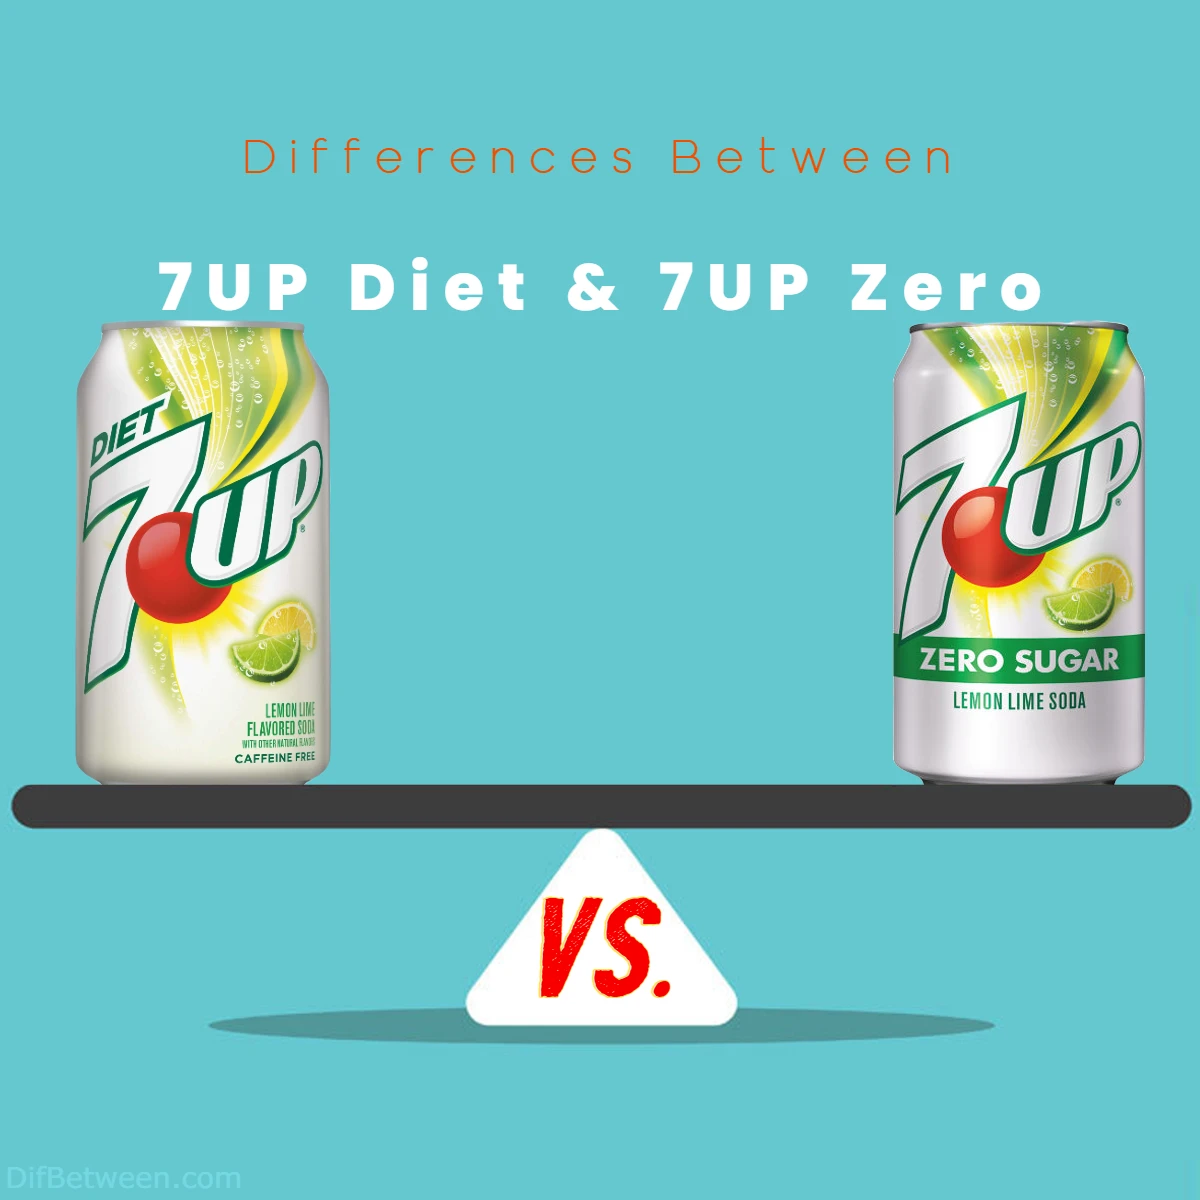 Differences Between 7UP Zero and 7UP Diet